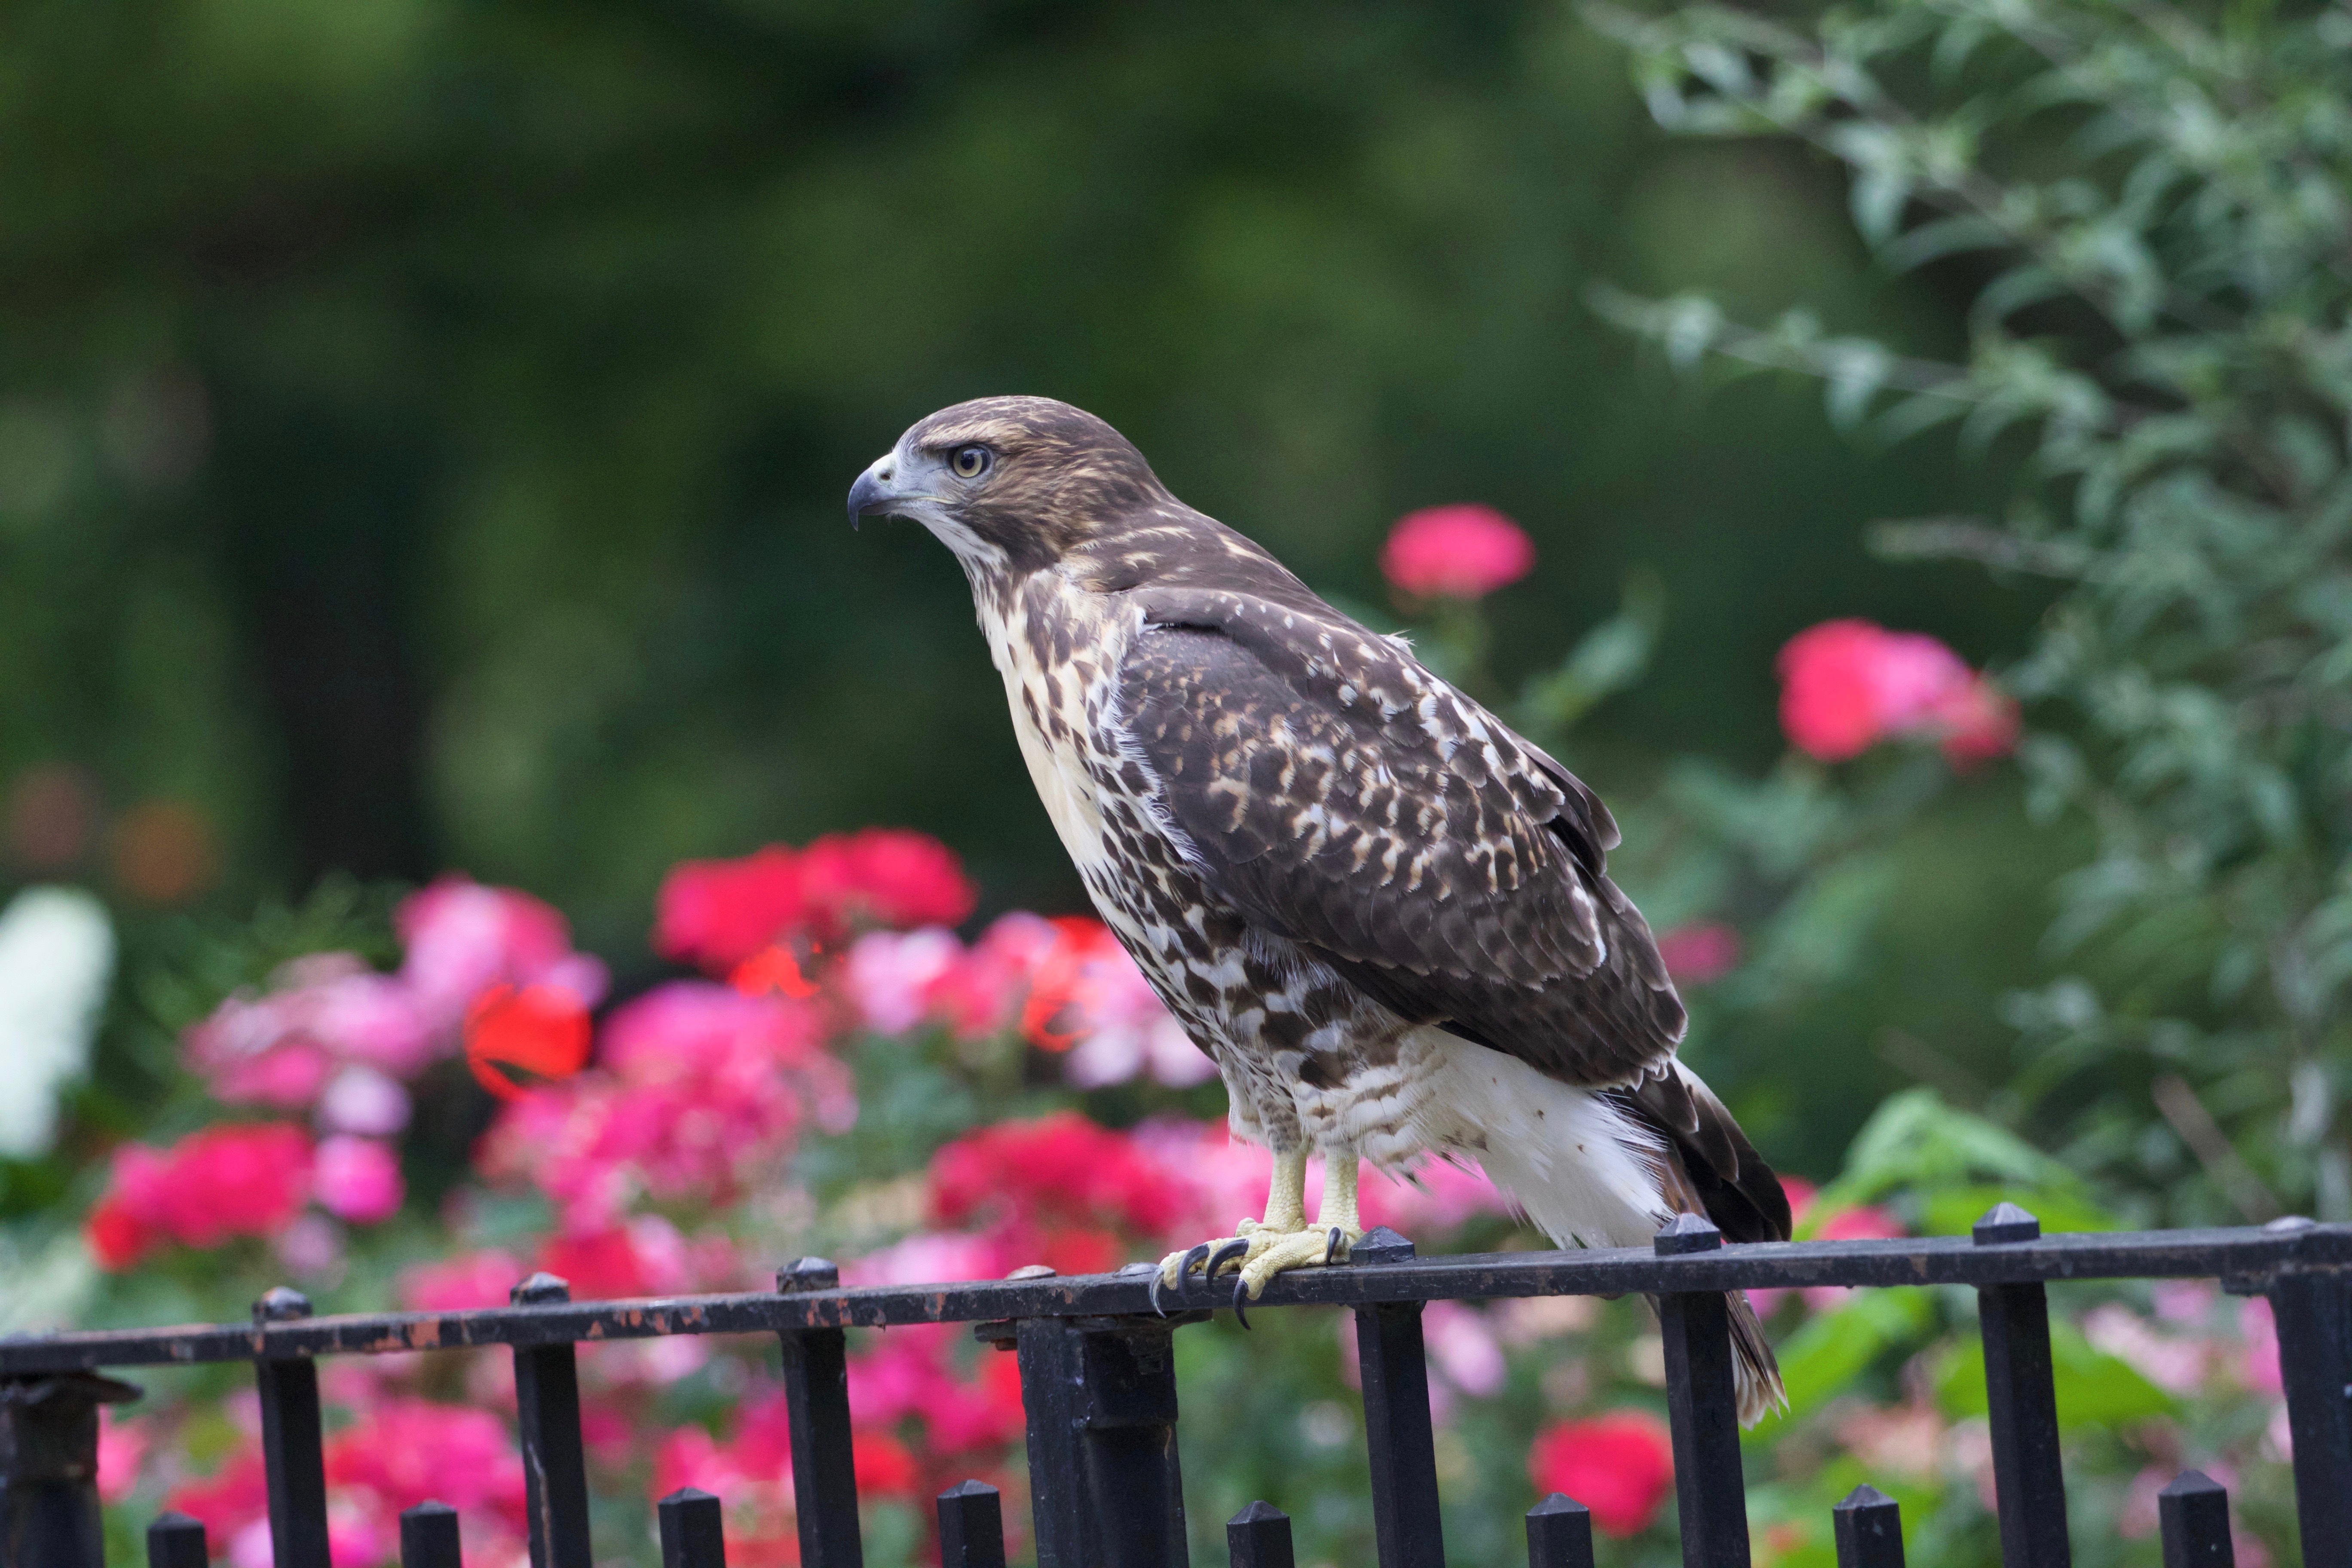 Red-tailed Hawks can get quite up close and personal in Tompkins Square Park. Photo: Jean Shum